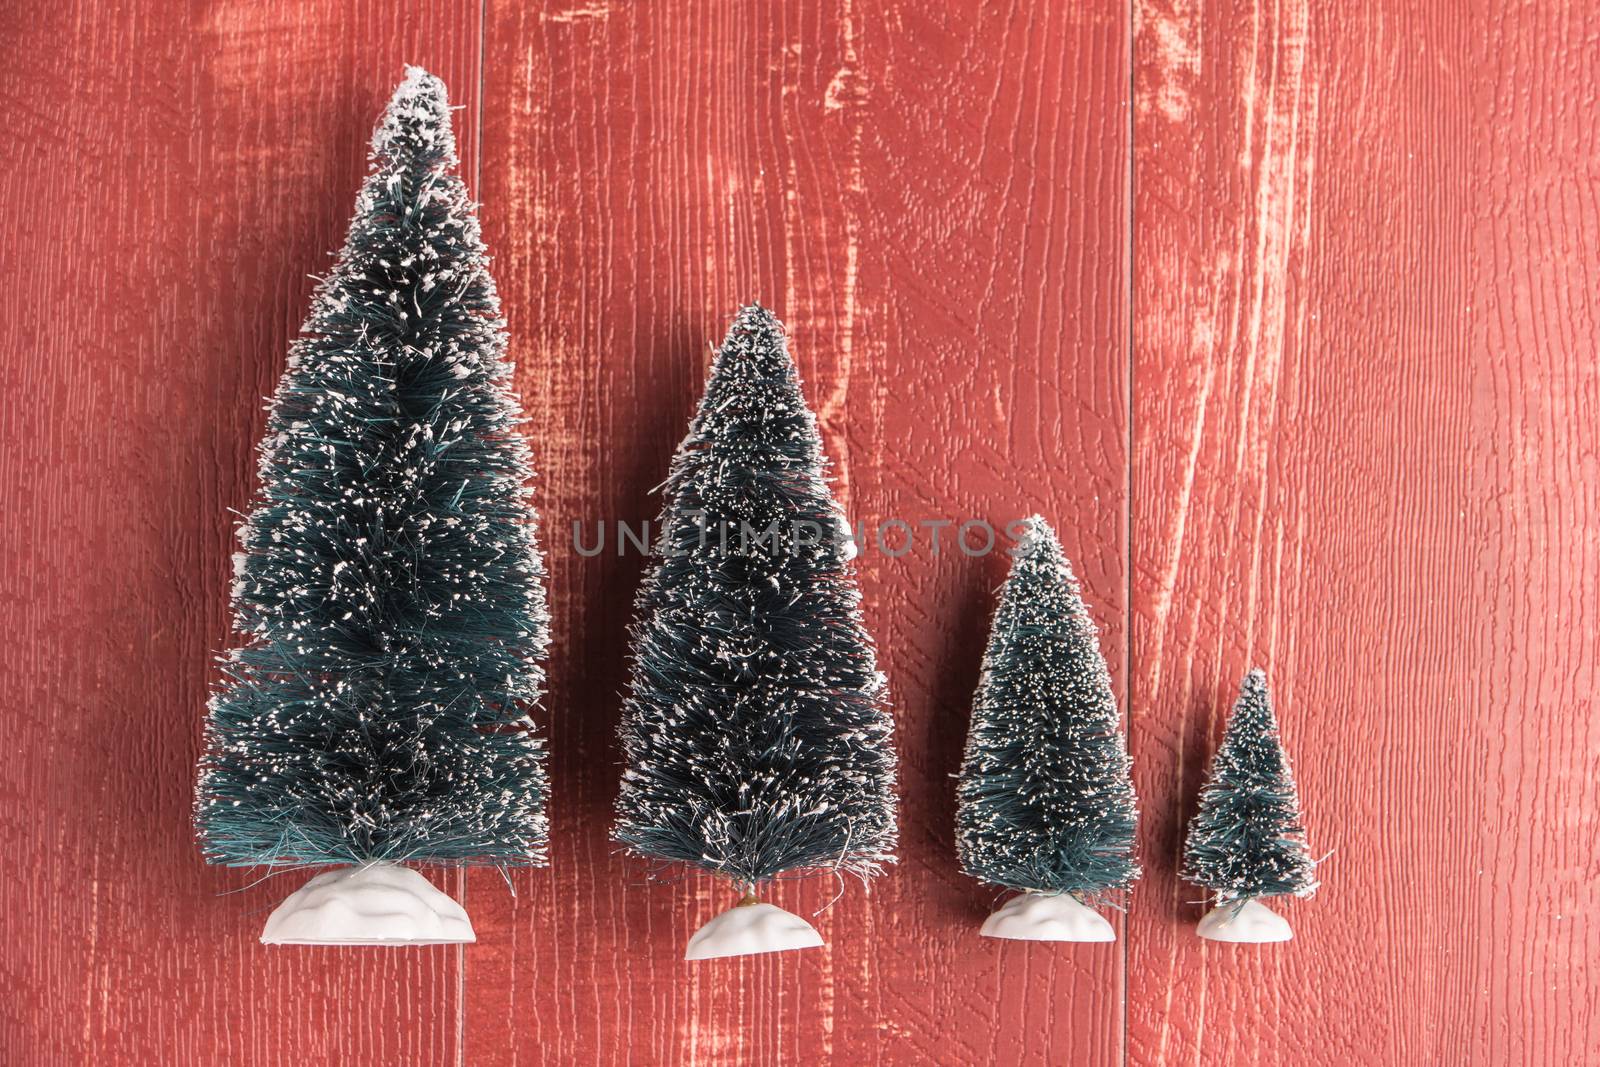 Miniature evergreen trees on red colored wooden board. Top view with copy space